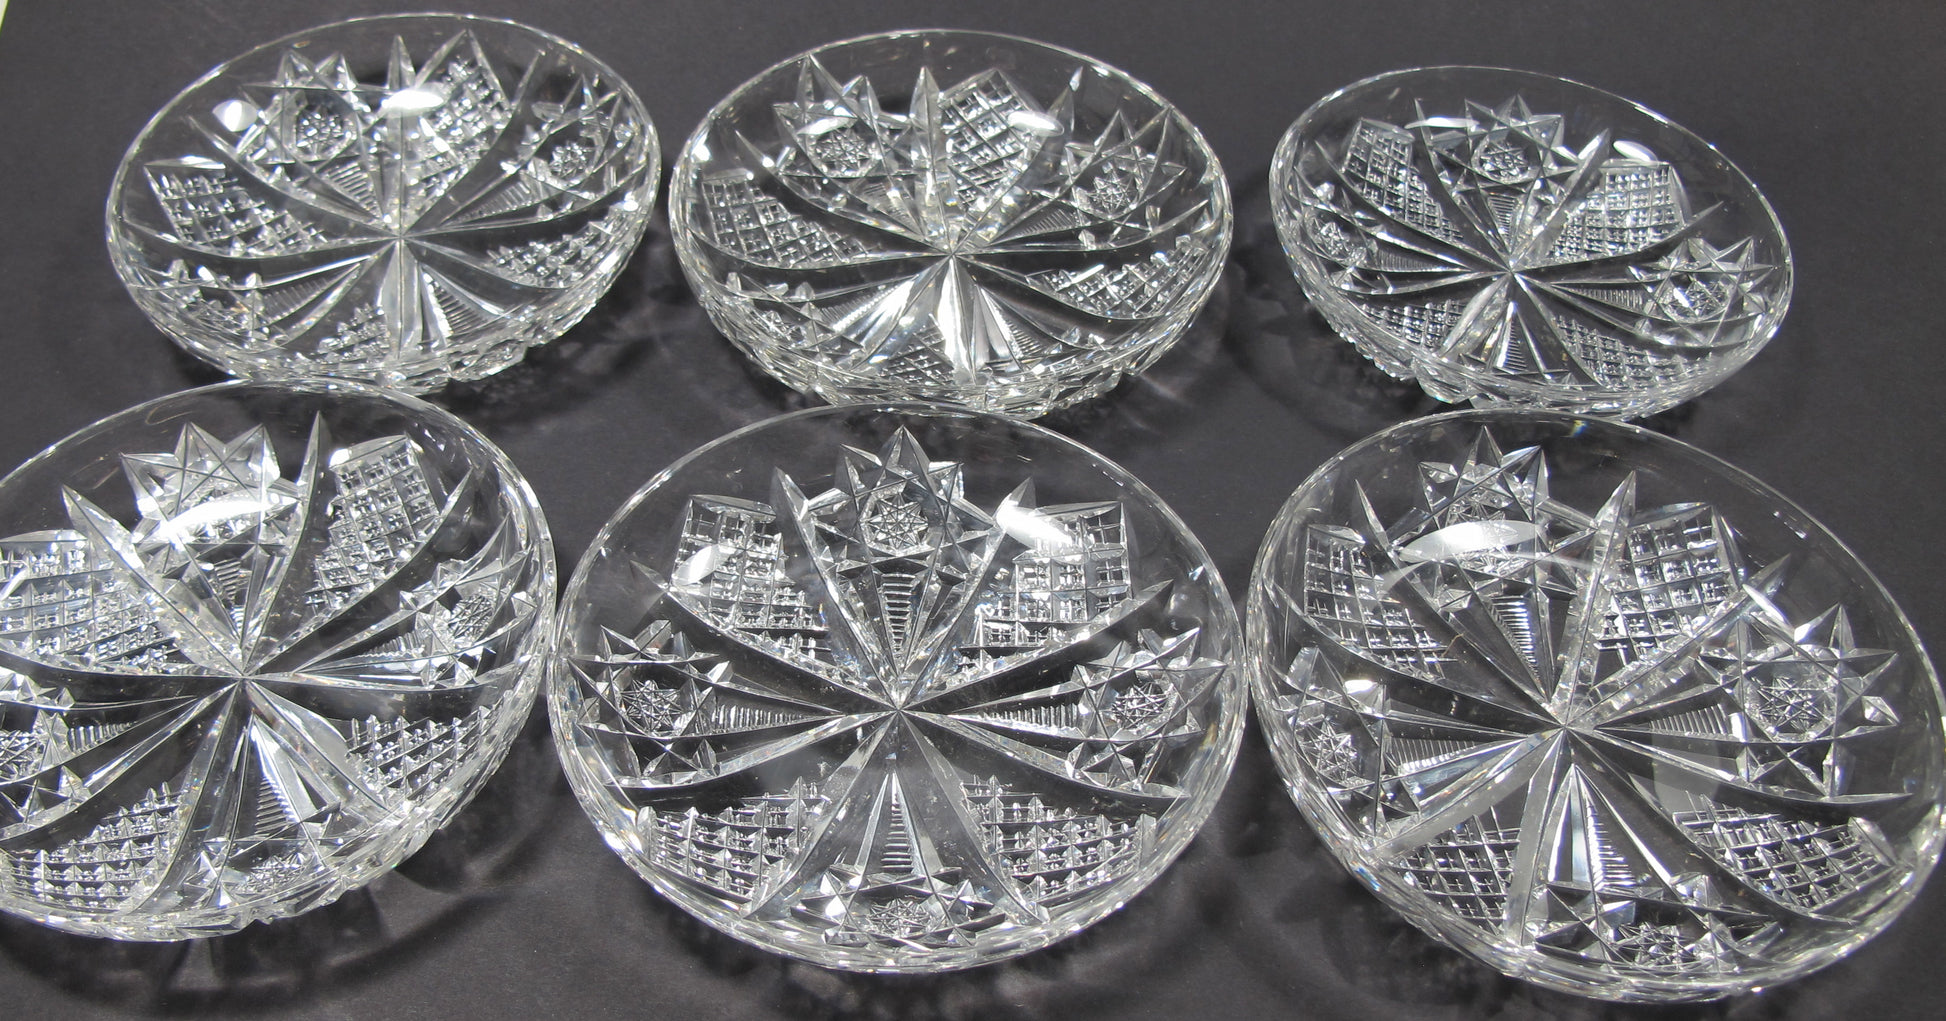 Signed Hawkes Antique Cut Glass dish American Brilliant period, ABP - O'Rourke crystal awards & gifts abp cut glass